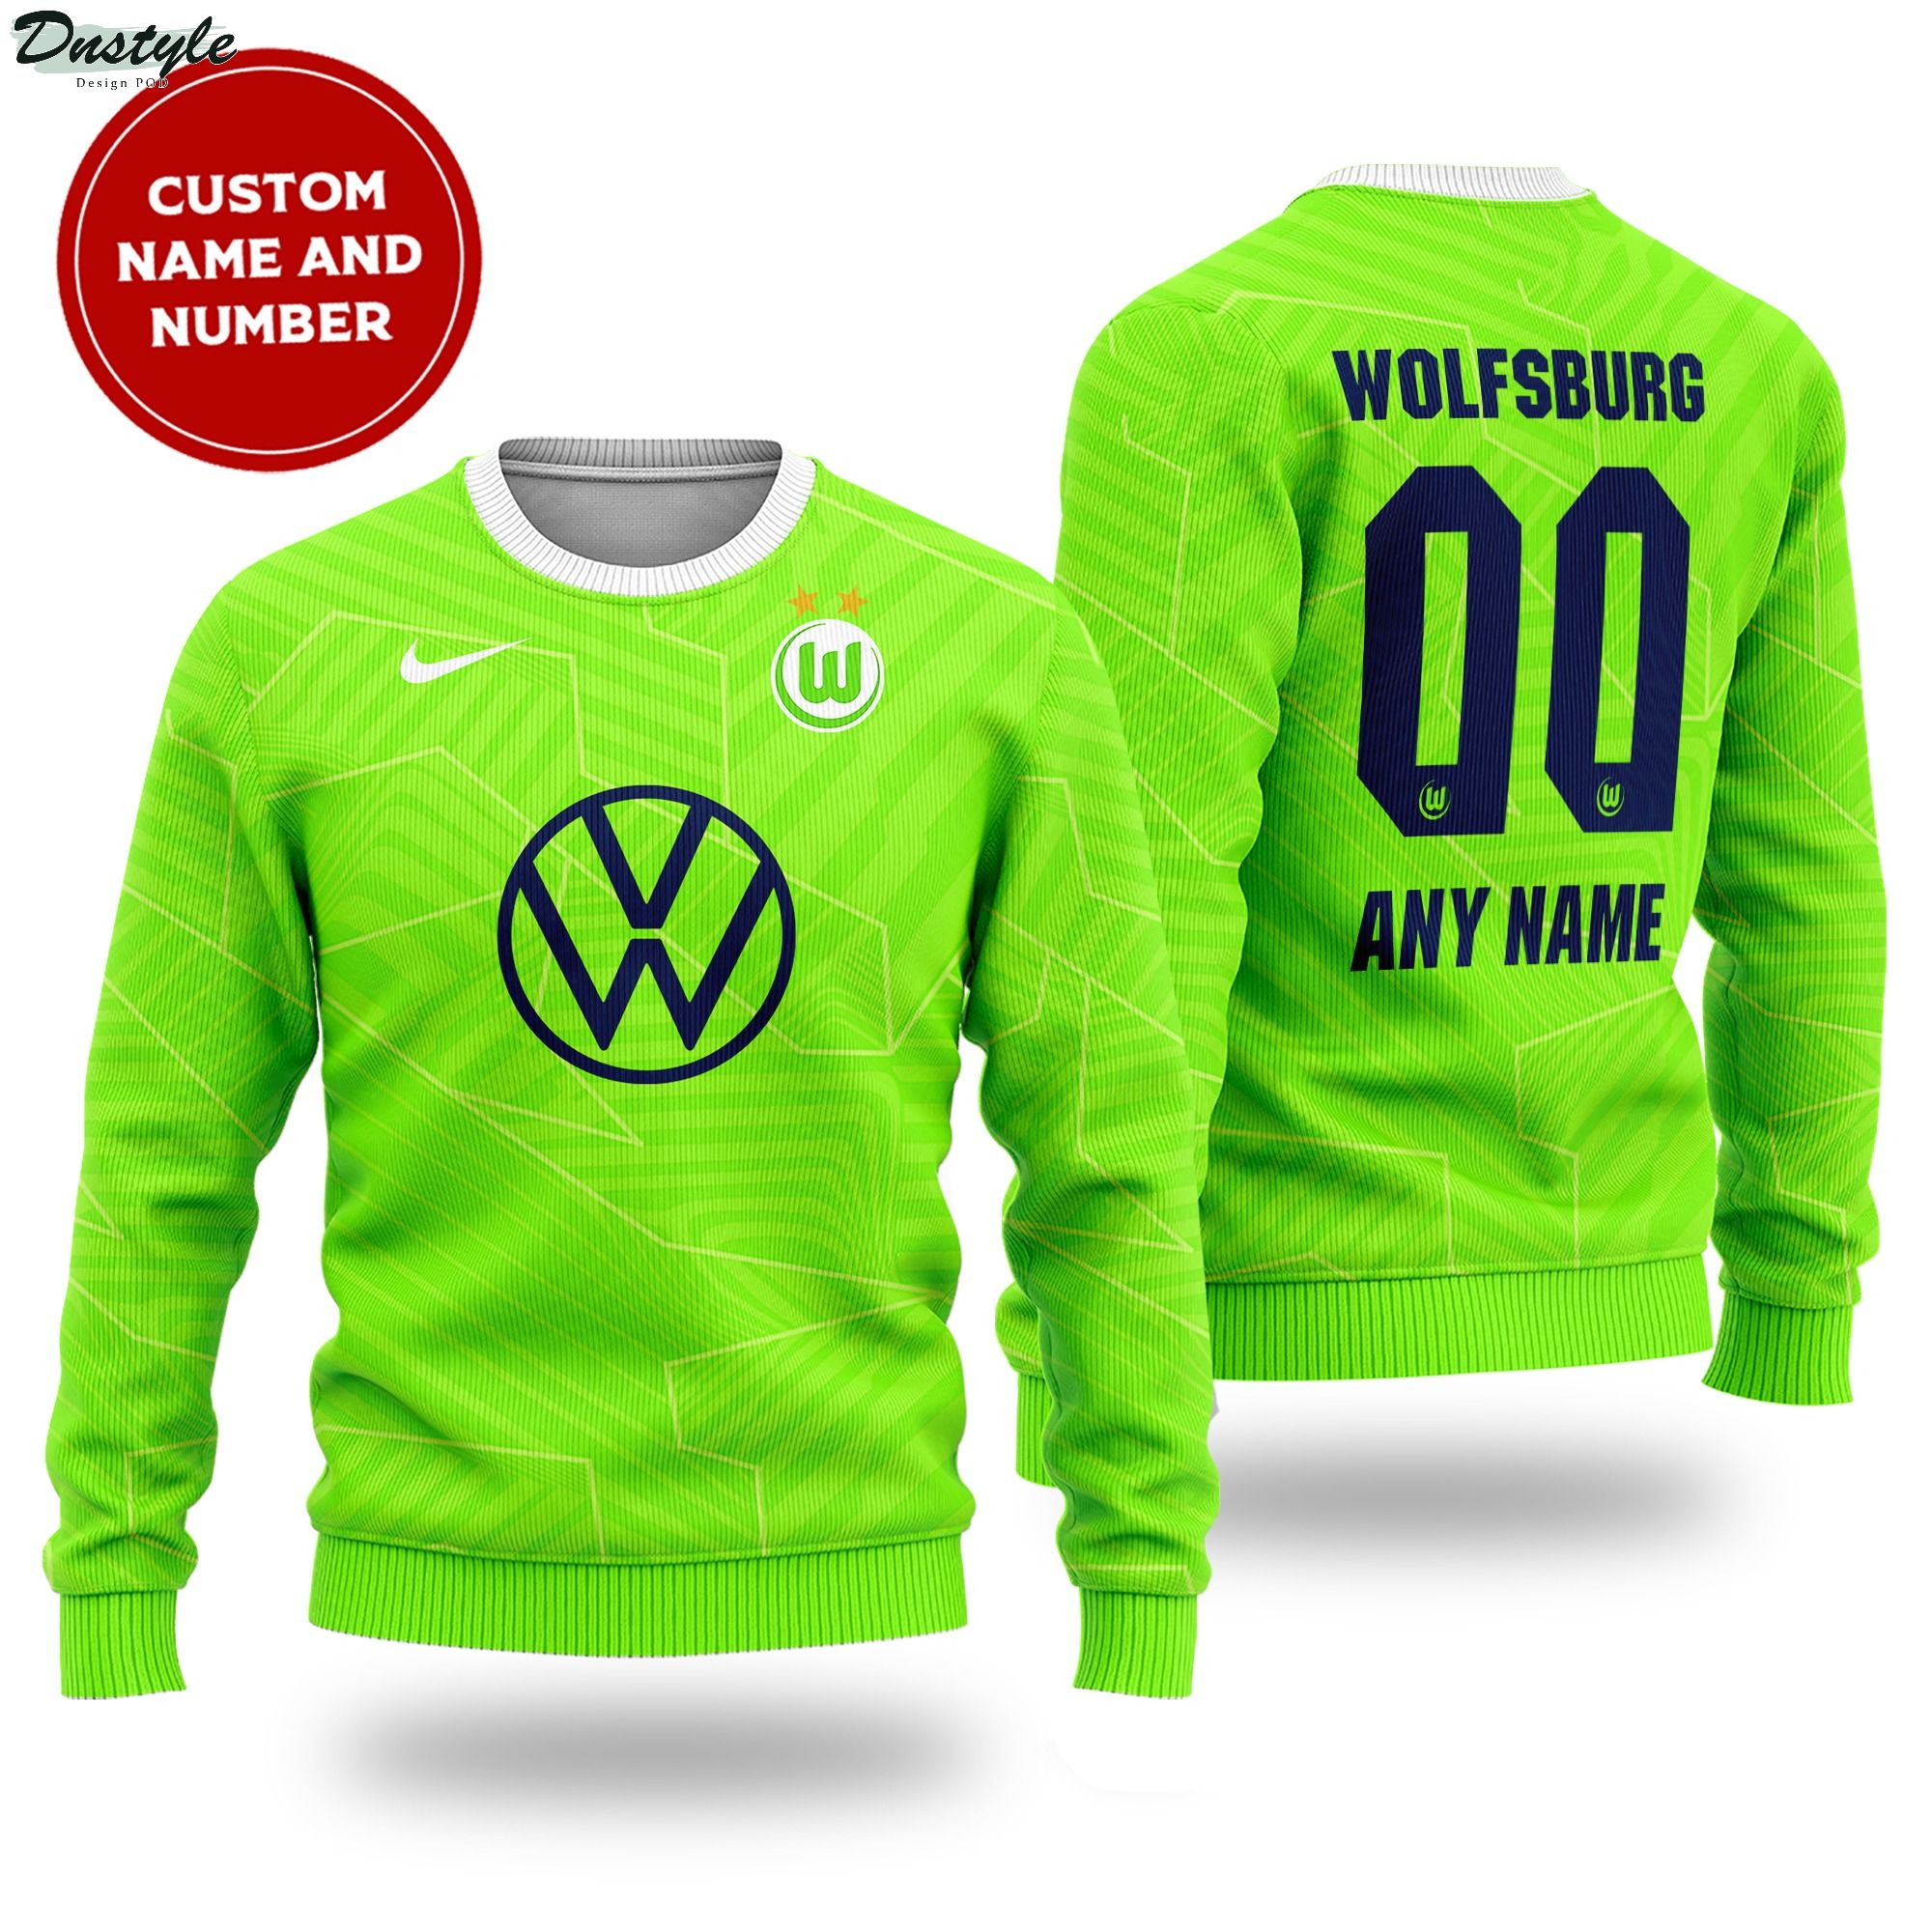 Wolfsburg custom name and number ugly sweater